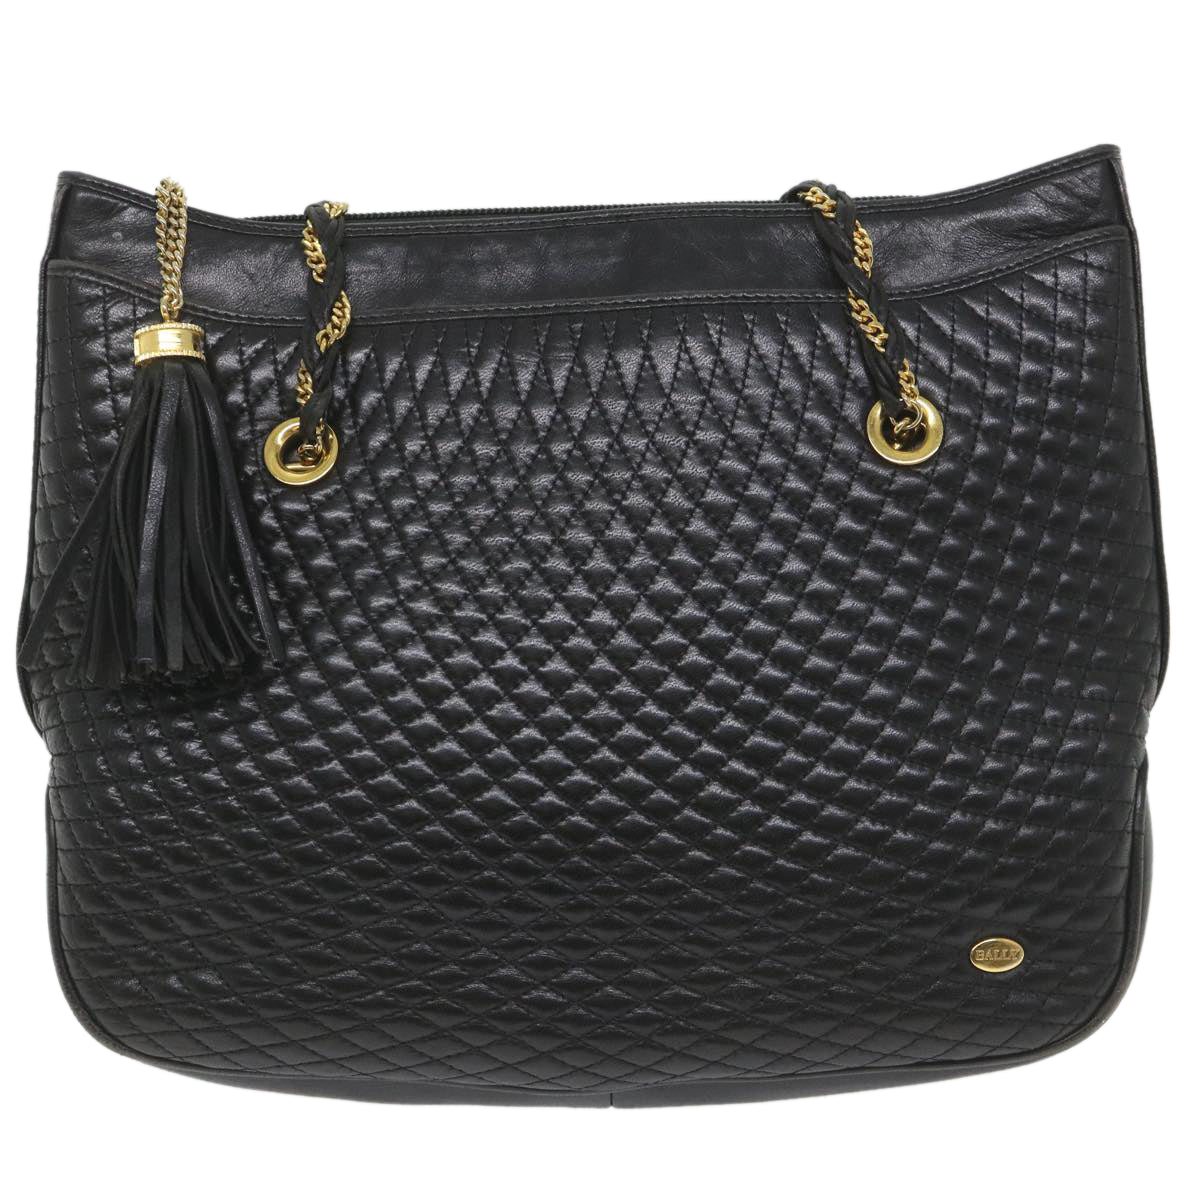 BALLY Quilted Chain Shoulder Bag Leather Black Auth bs9624